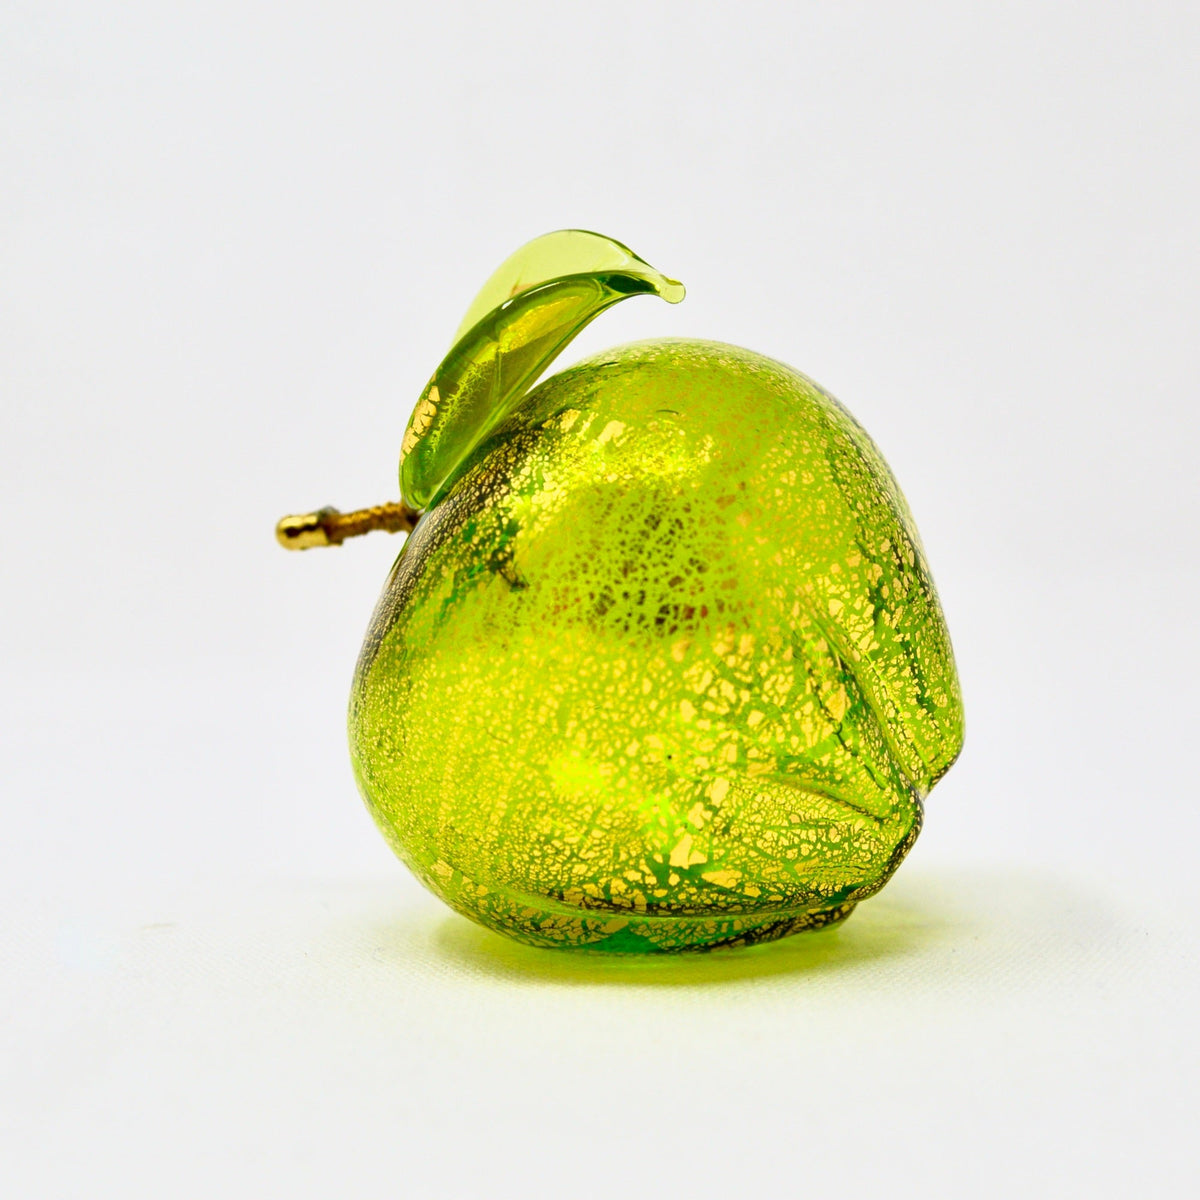 Murano Blown Glass Apple, Light Green with Gold Foil, Made in Italy - My Italian Decor